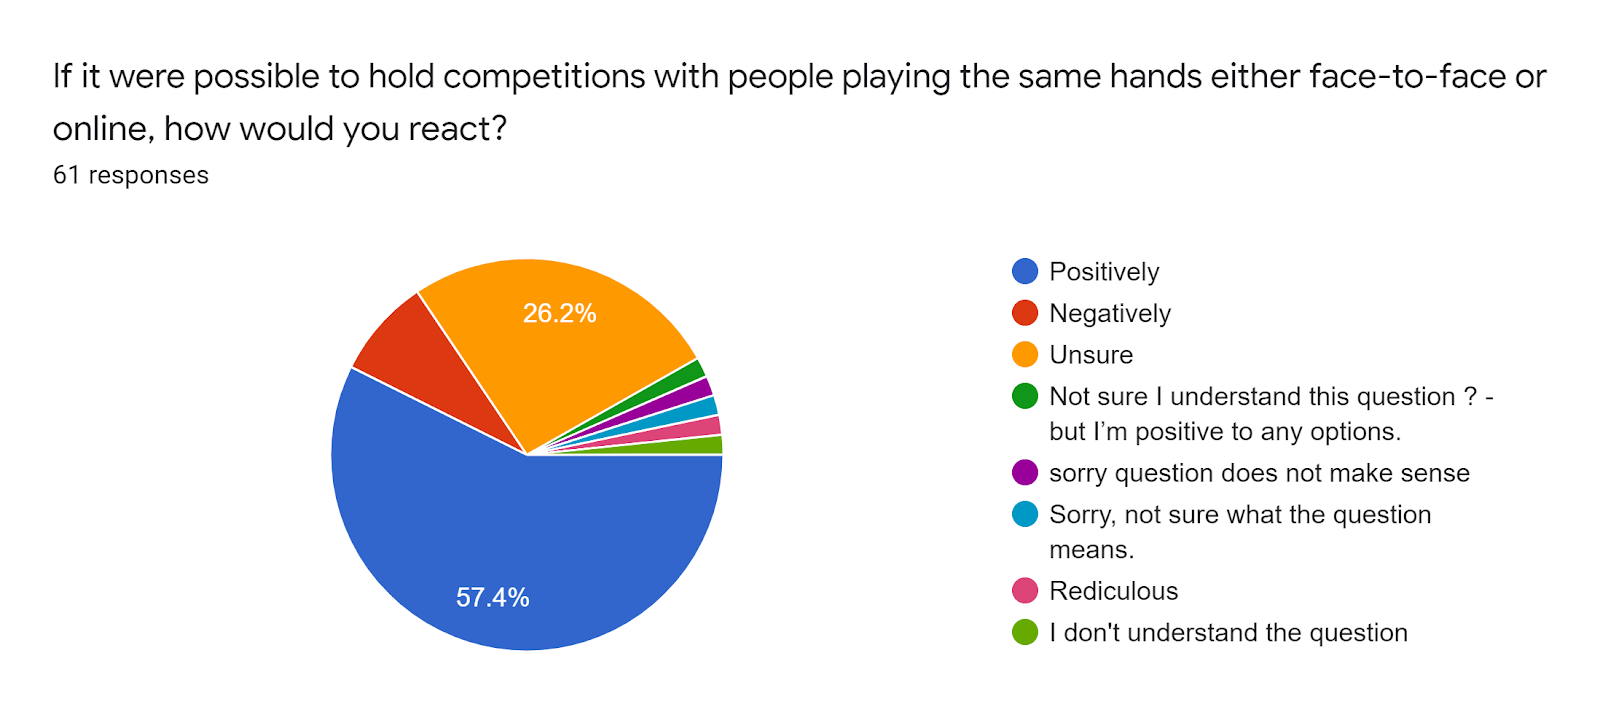 Forms response chart. Question title: If it were possible to hold competitions with people playing the same hands either face-to-face or online, how would you react?. Number of responses: 61 responses.